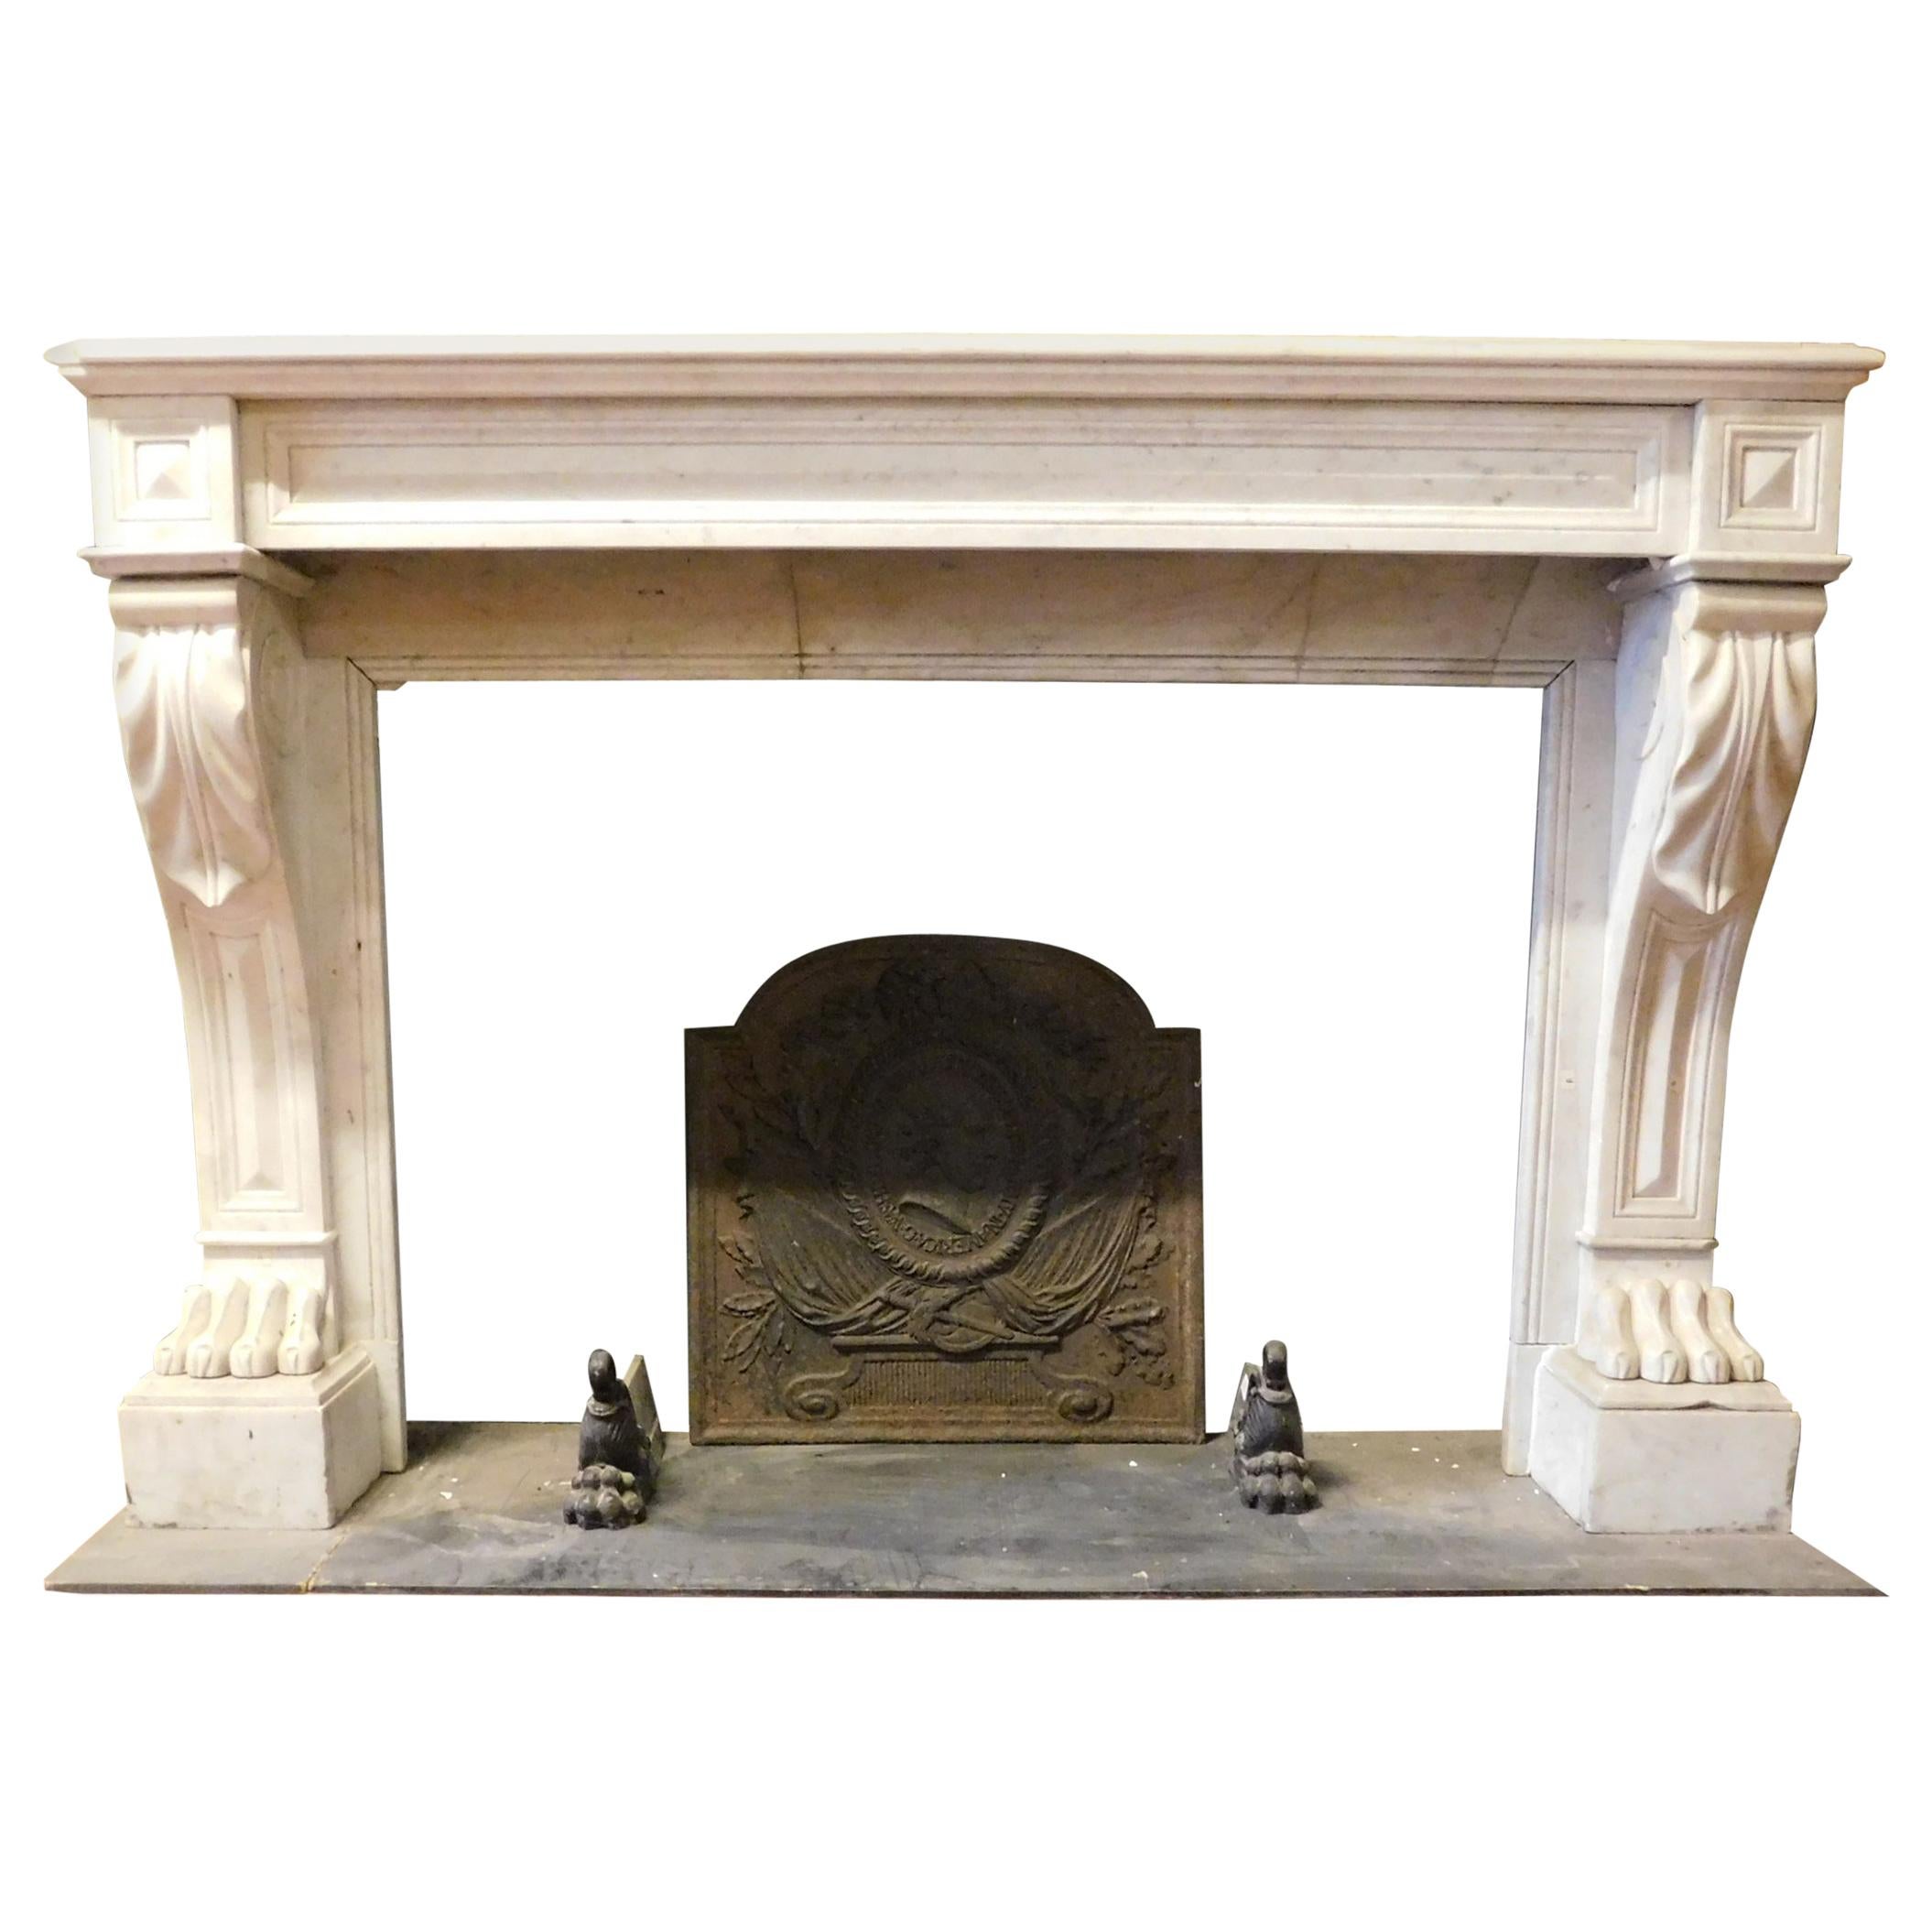 Antique Empire Style Fireplace, White Carrara Marble, Lion Paws, 1800 France